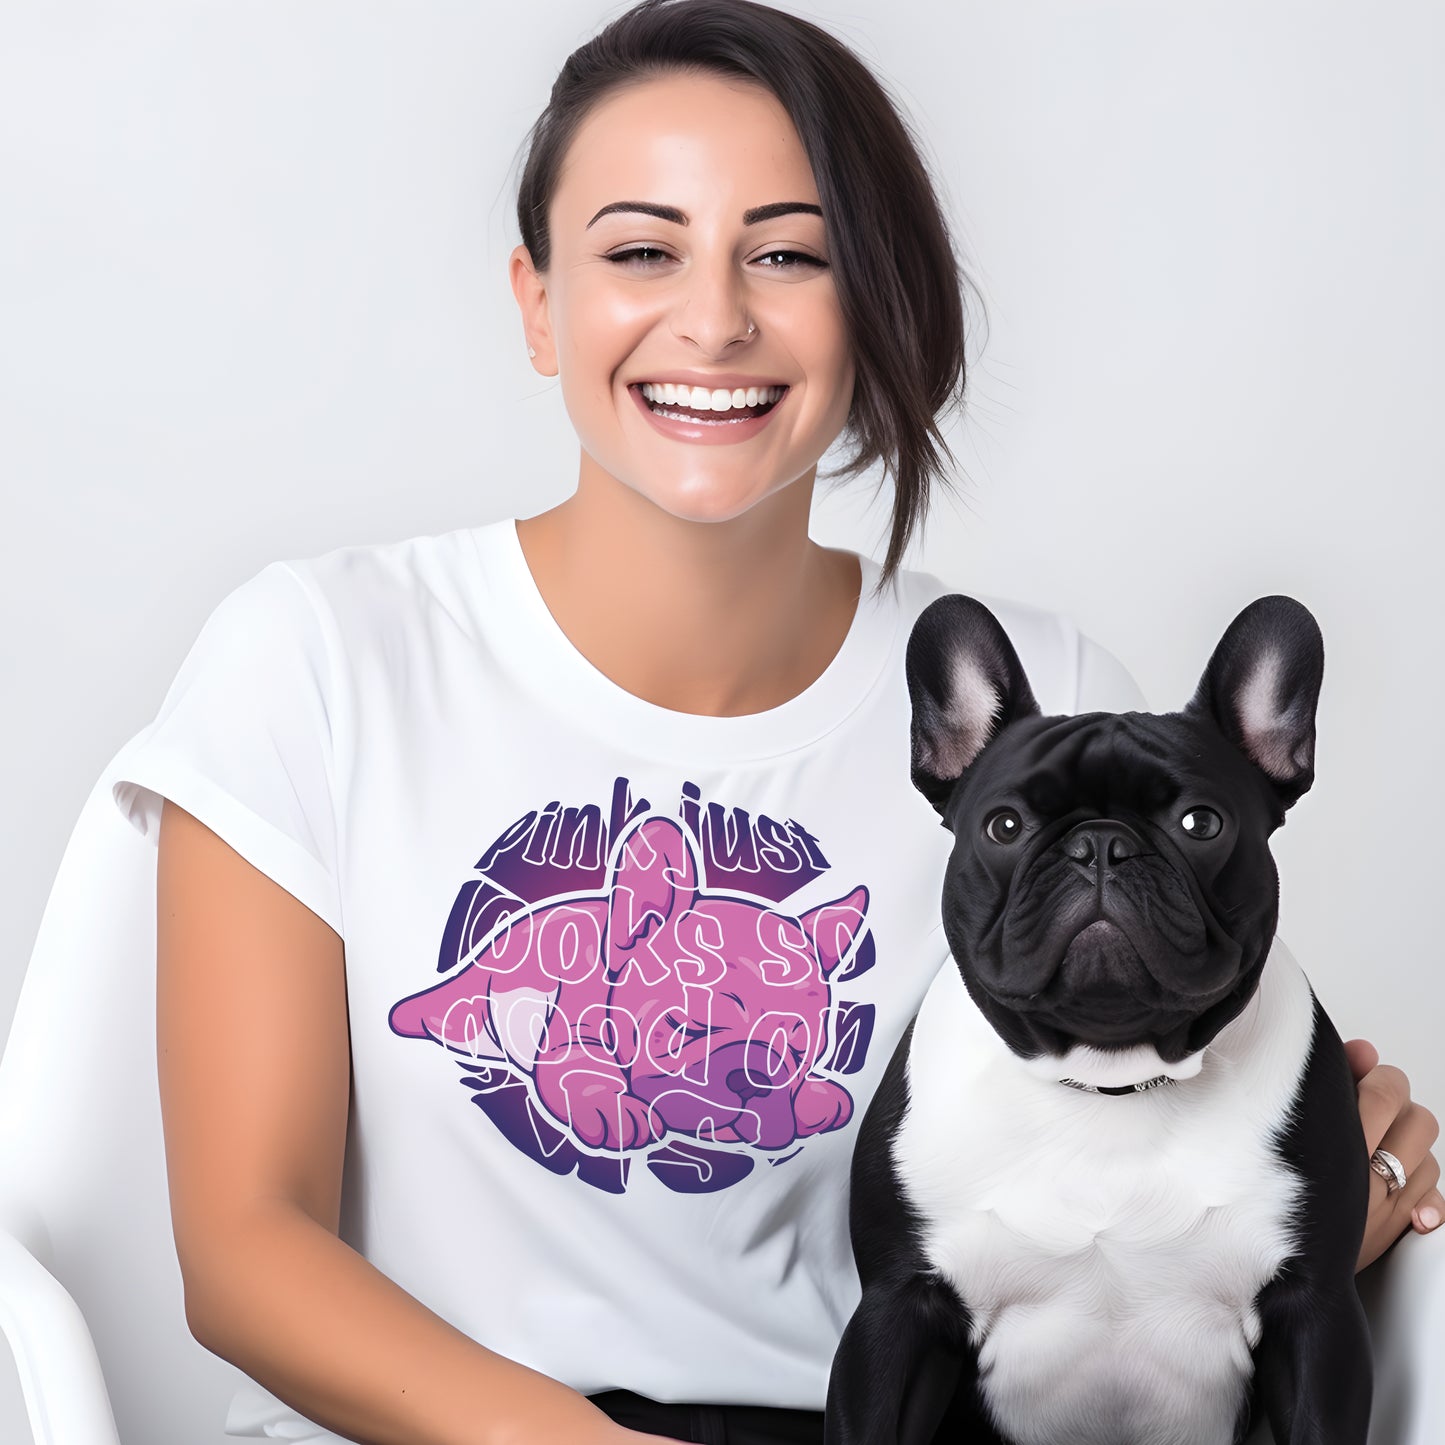 A pink frenchie's world - Unisex T-Shirt